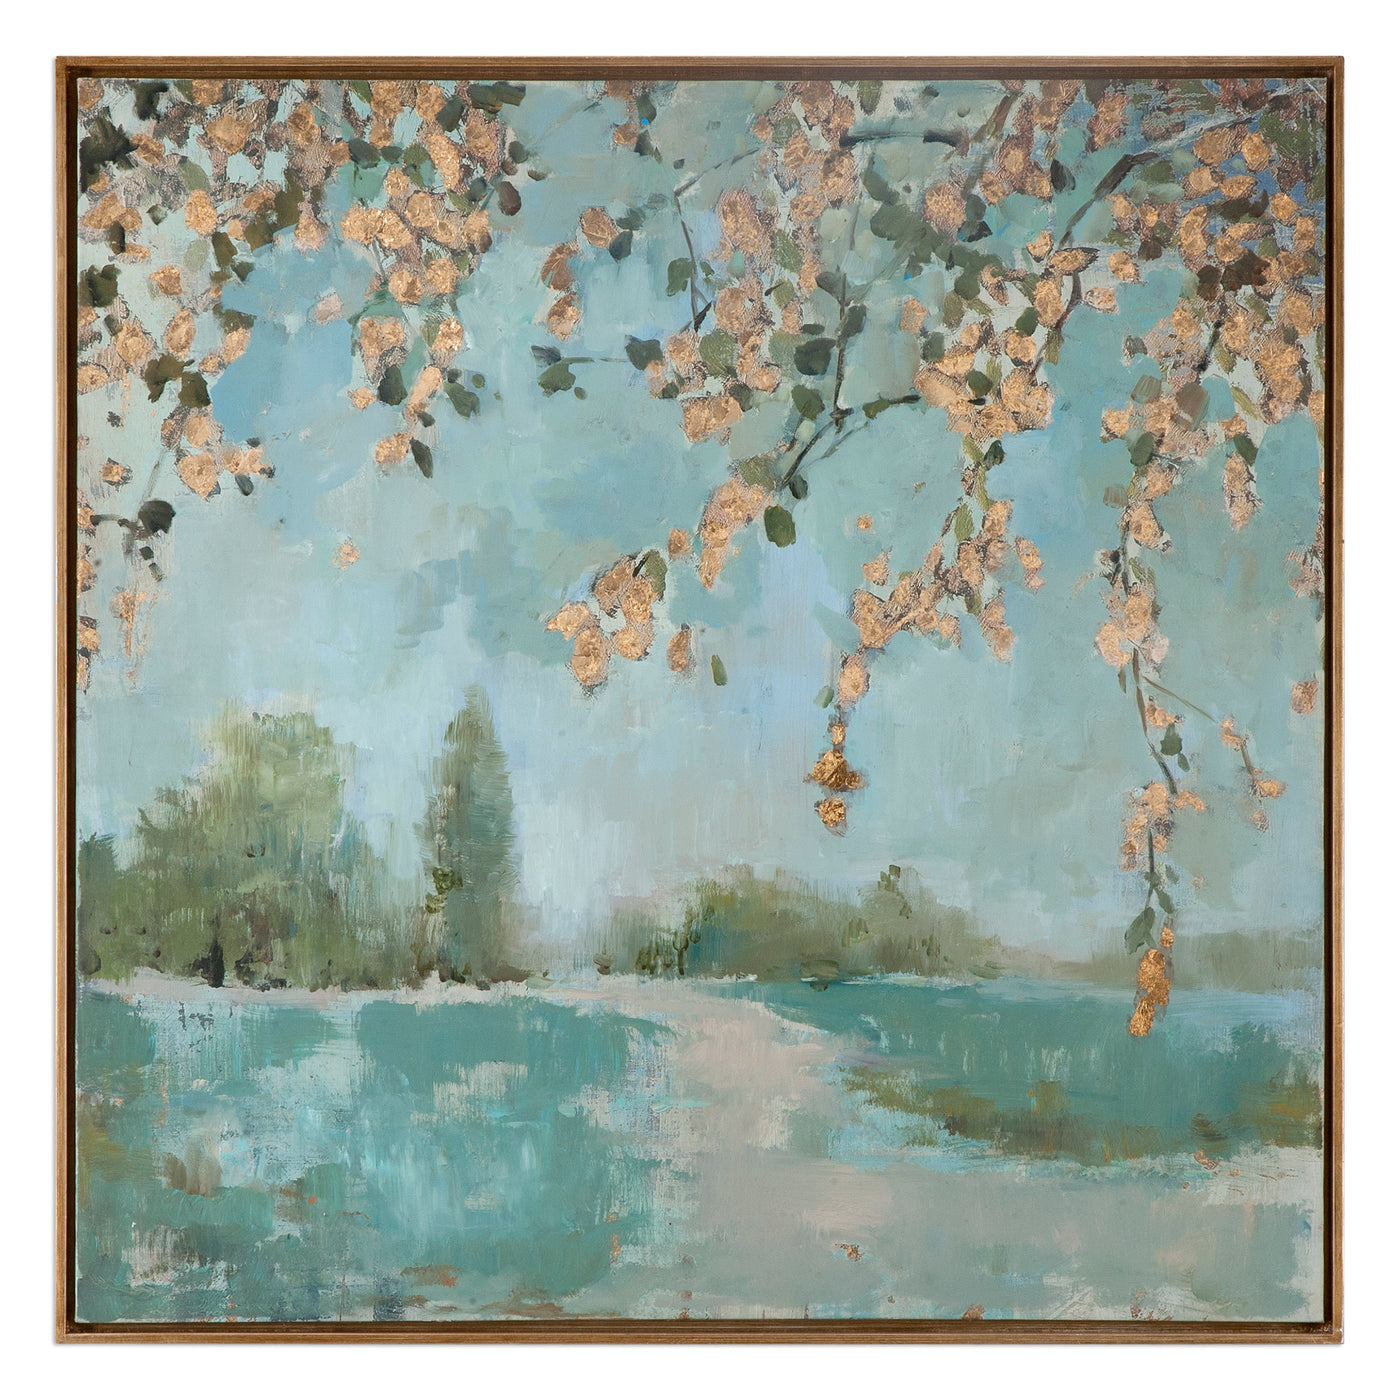 A Tranquil Nature Scene Is Portrayed In This Hand Painted Landscape On Canvas. Sophisticated Shades Of Blue, Green, And Gr...